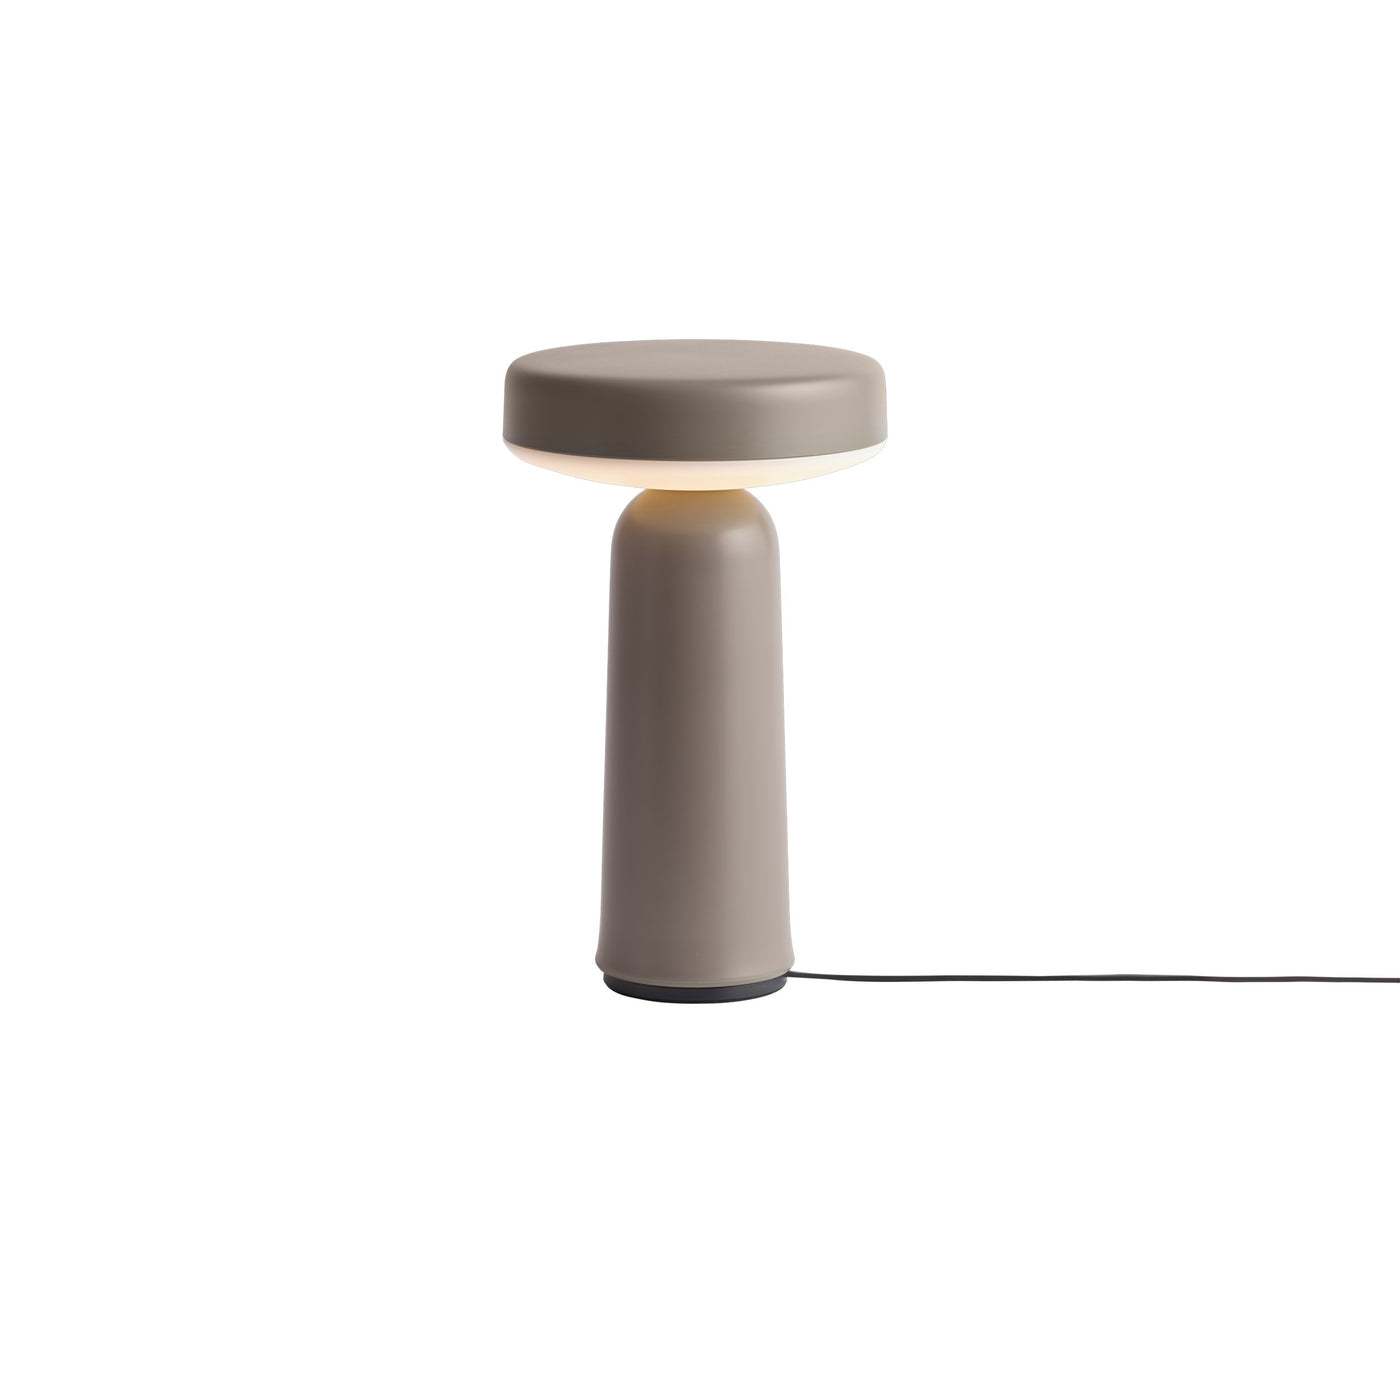 Muuto Ease Portable Lamp. Free UK delivery at someday designs. #colour_taupe